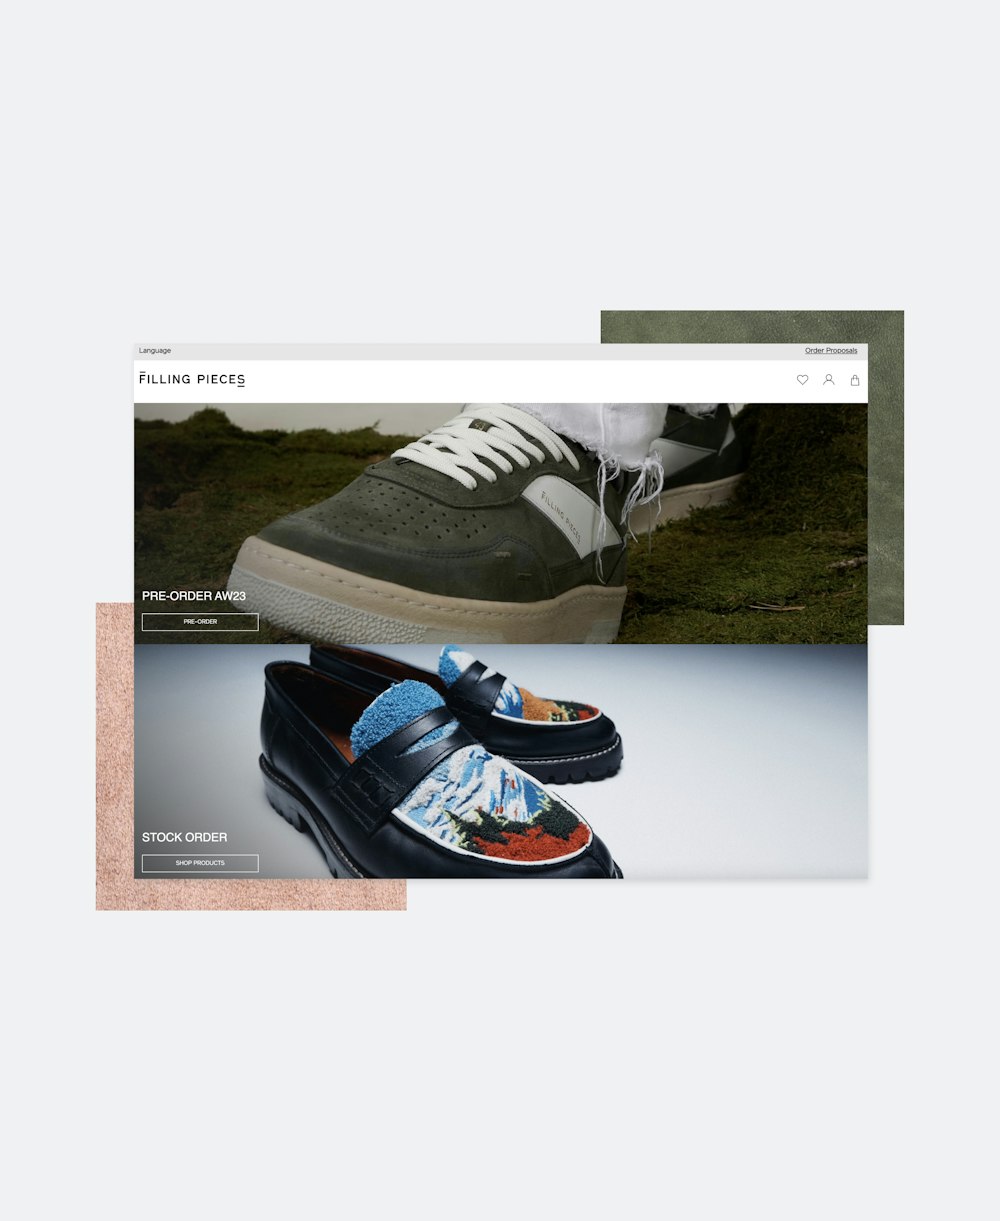 B2B brand portal for Filling Pieces